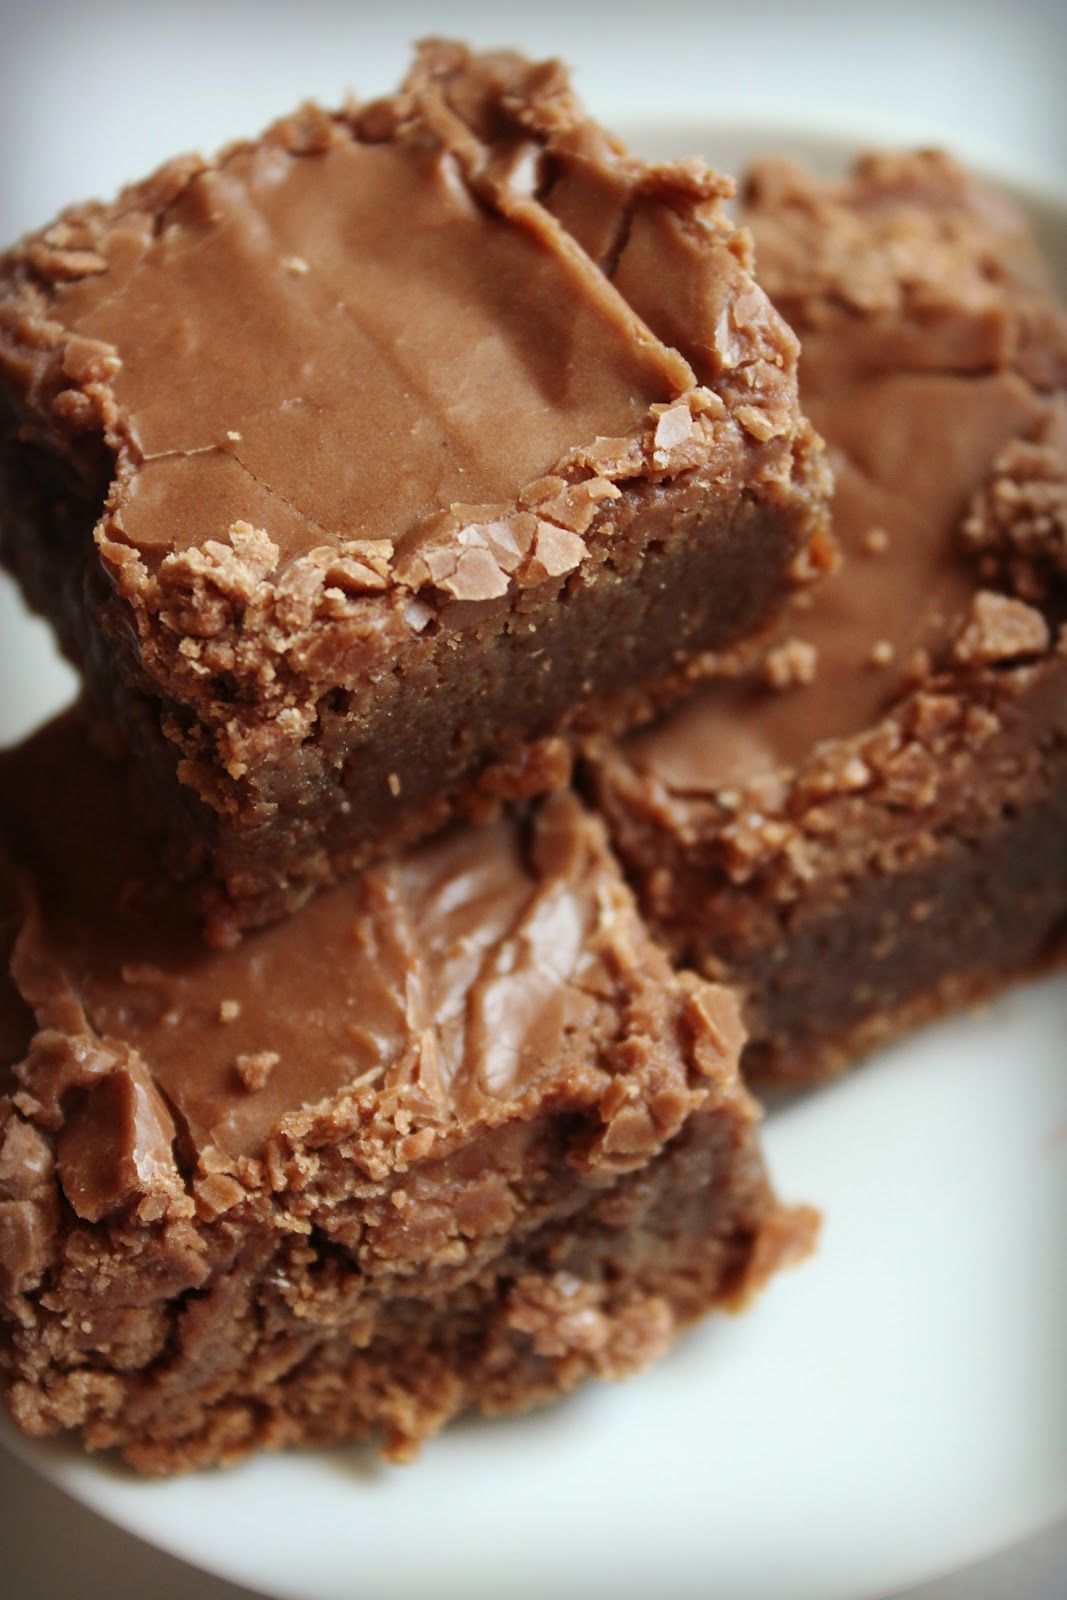 This brownie recipe is no ordinary recipe, today I'd like to give you a brow